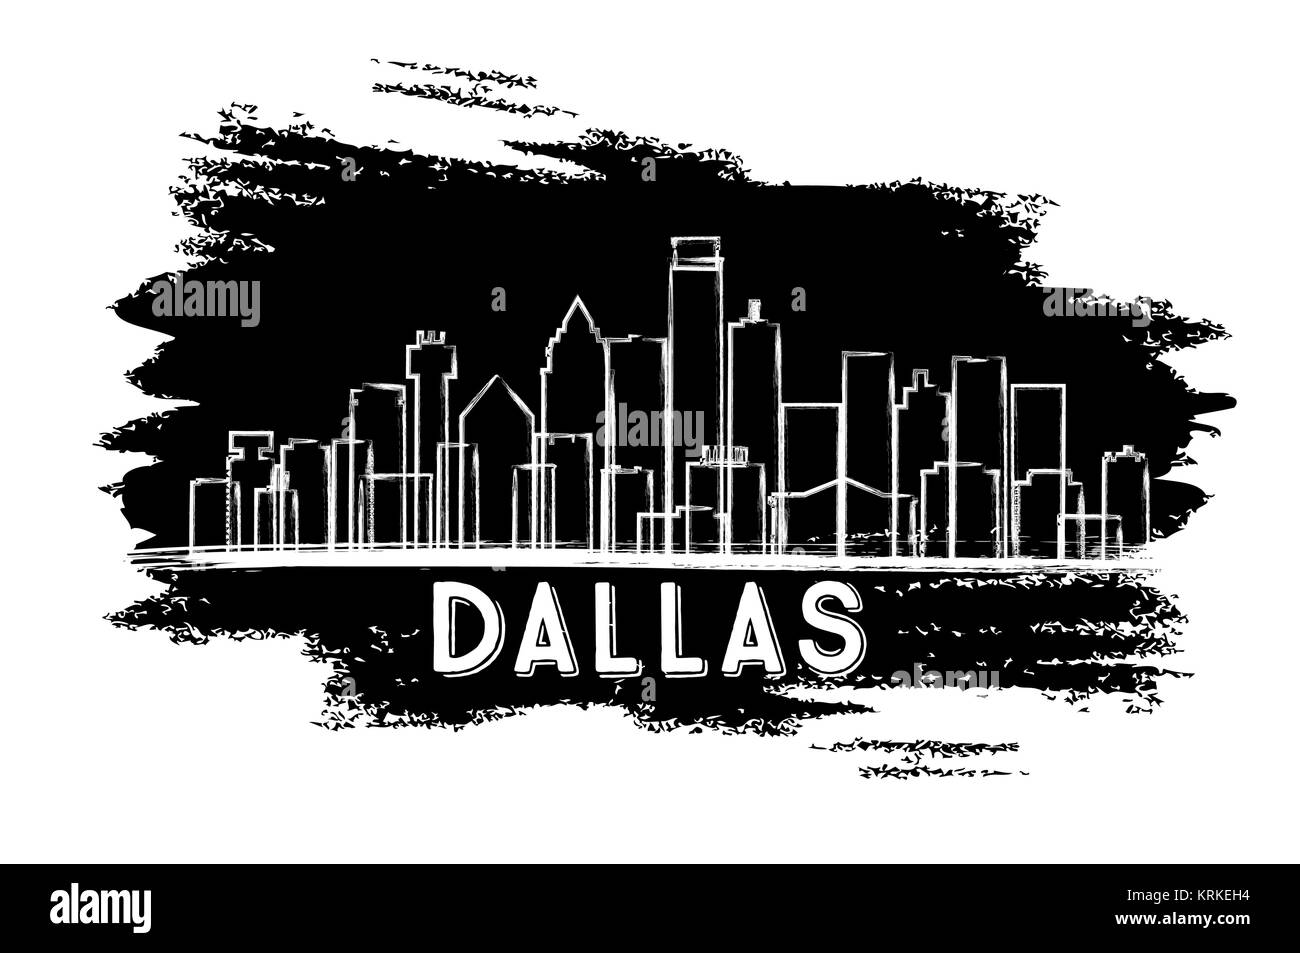 Dallas Texas USA City Skyline Silhouette. Hand Drawn Sketch. Business Travel and Tourism Concept with Modern Architecture. Vector Illustration. Stock Vector